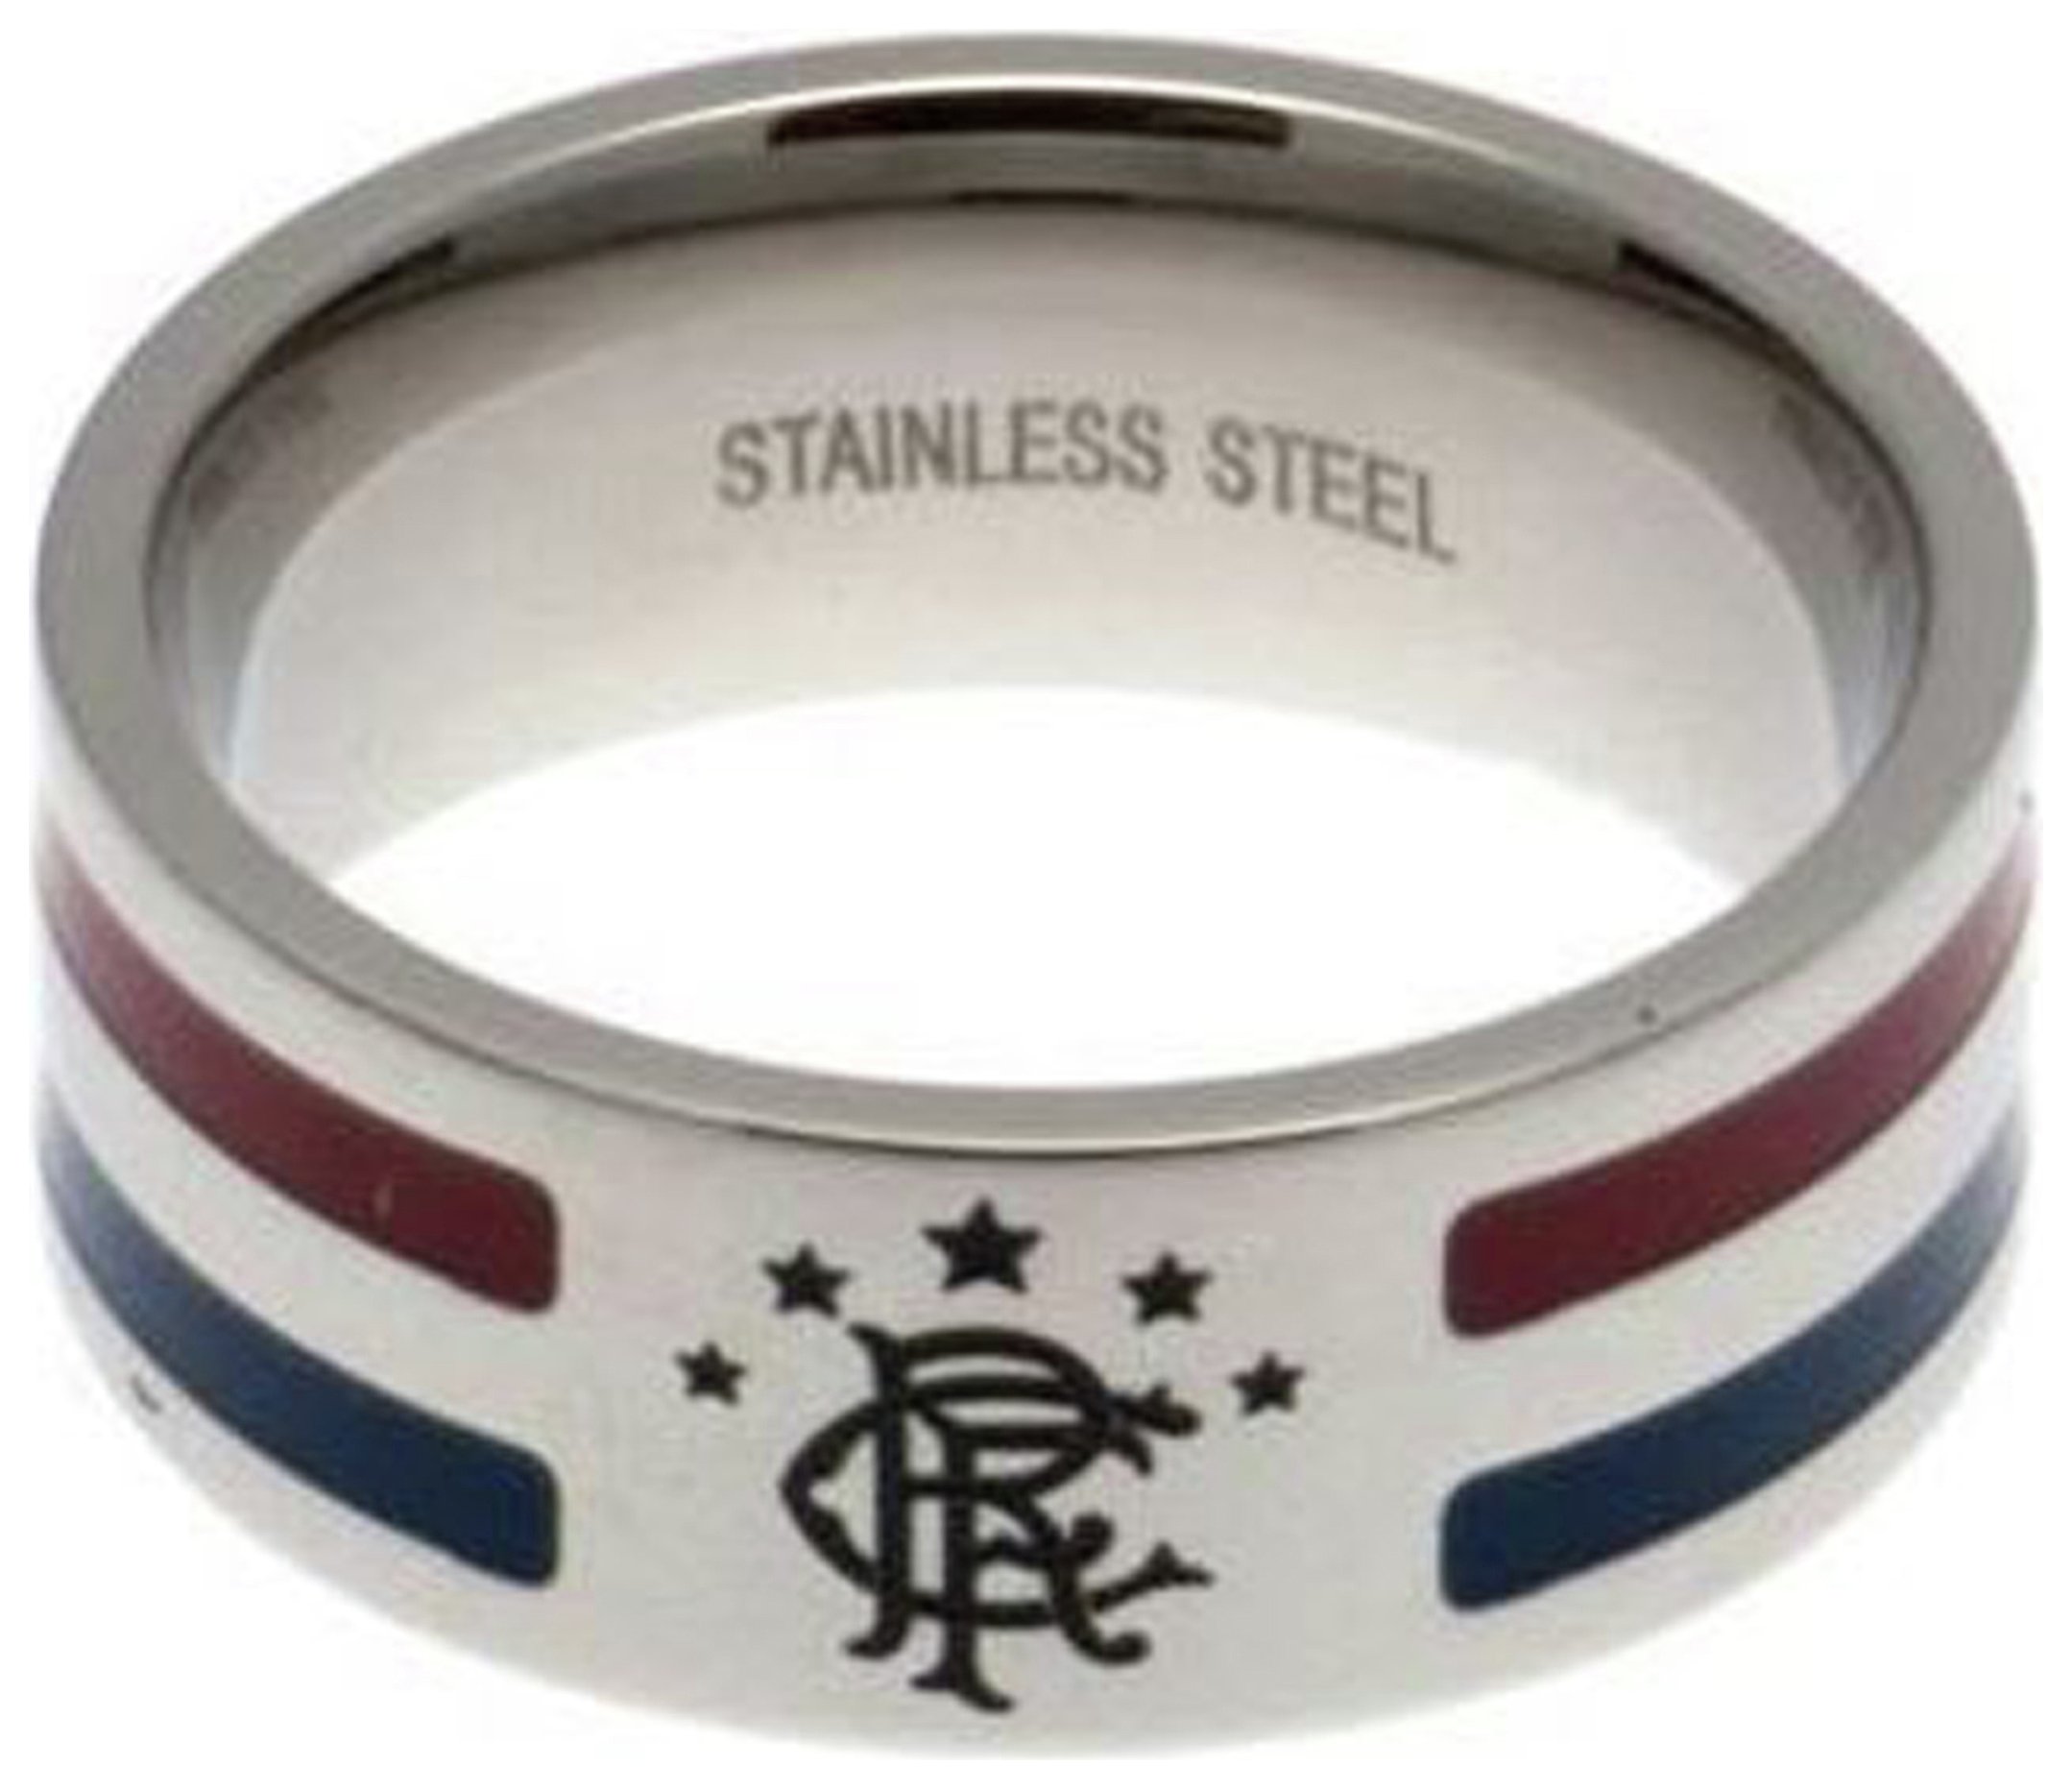 Stainless Steel Rangers Striped Ring - Size R